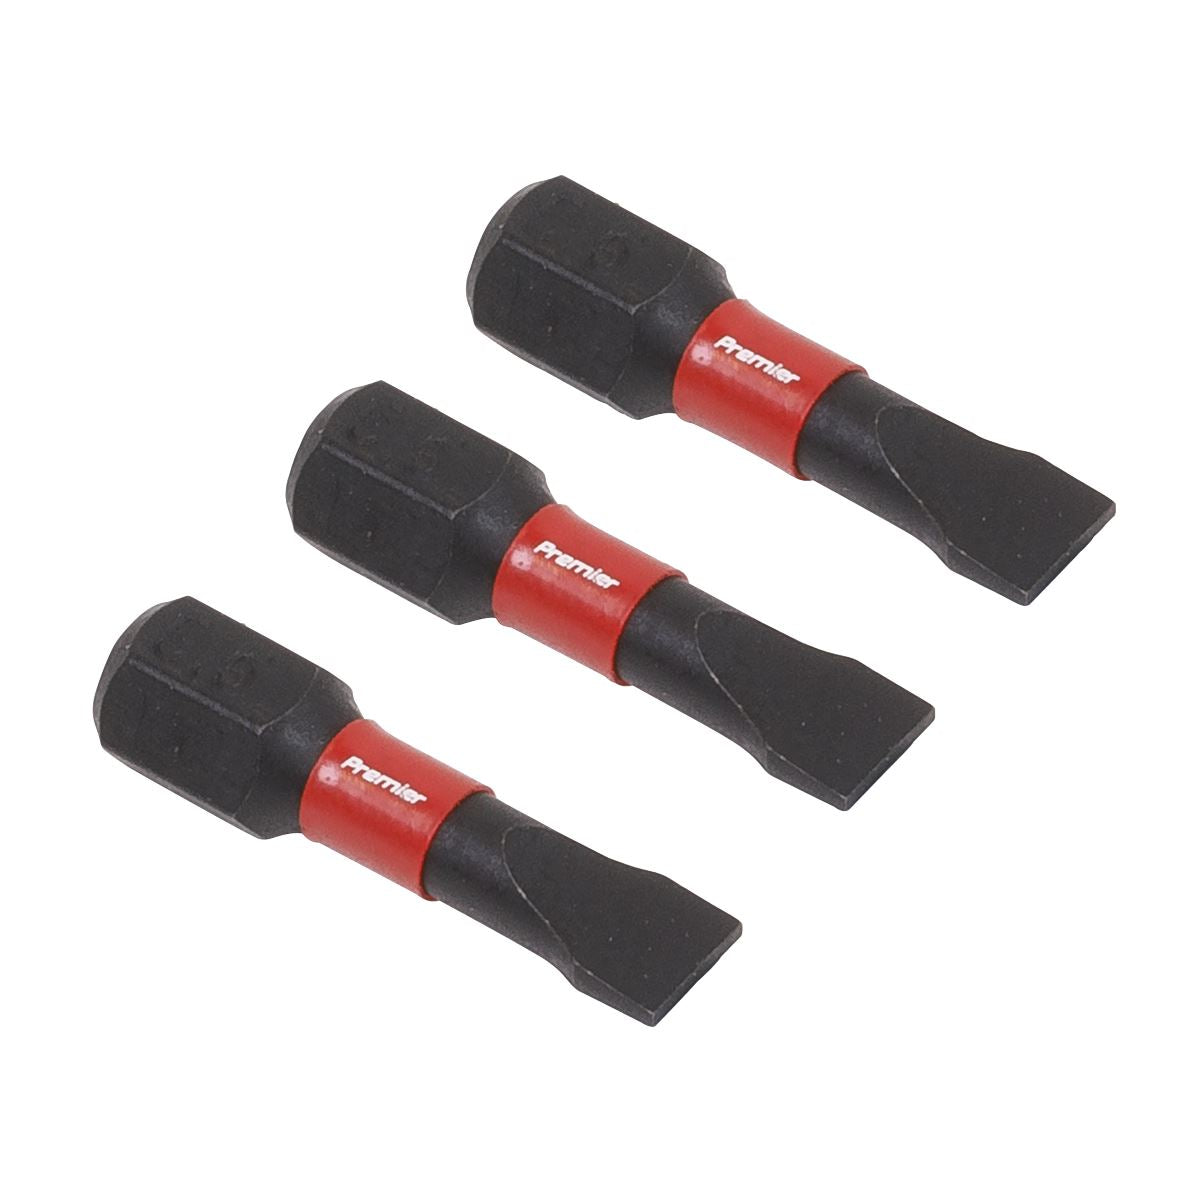 Sealey Premier Slotted 5.5mm Impact Power Tool Bits 25mm - 3pc